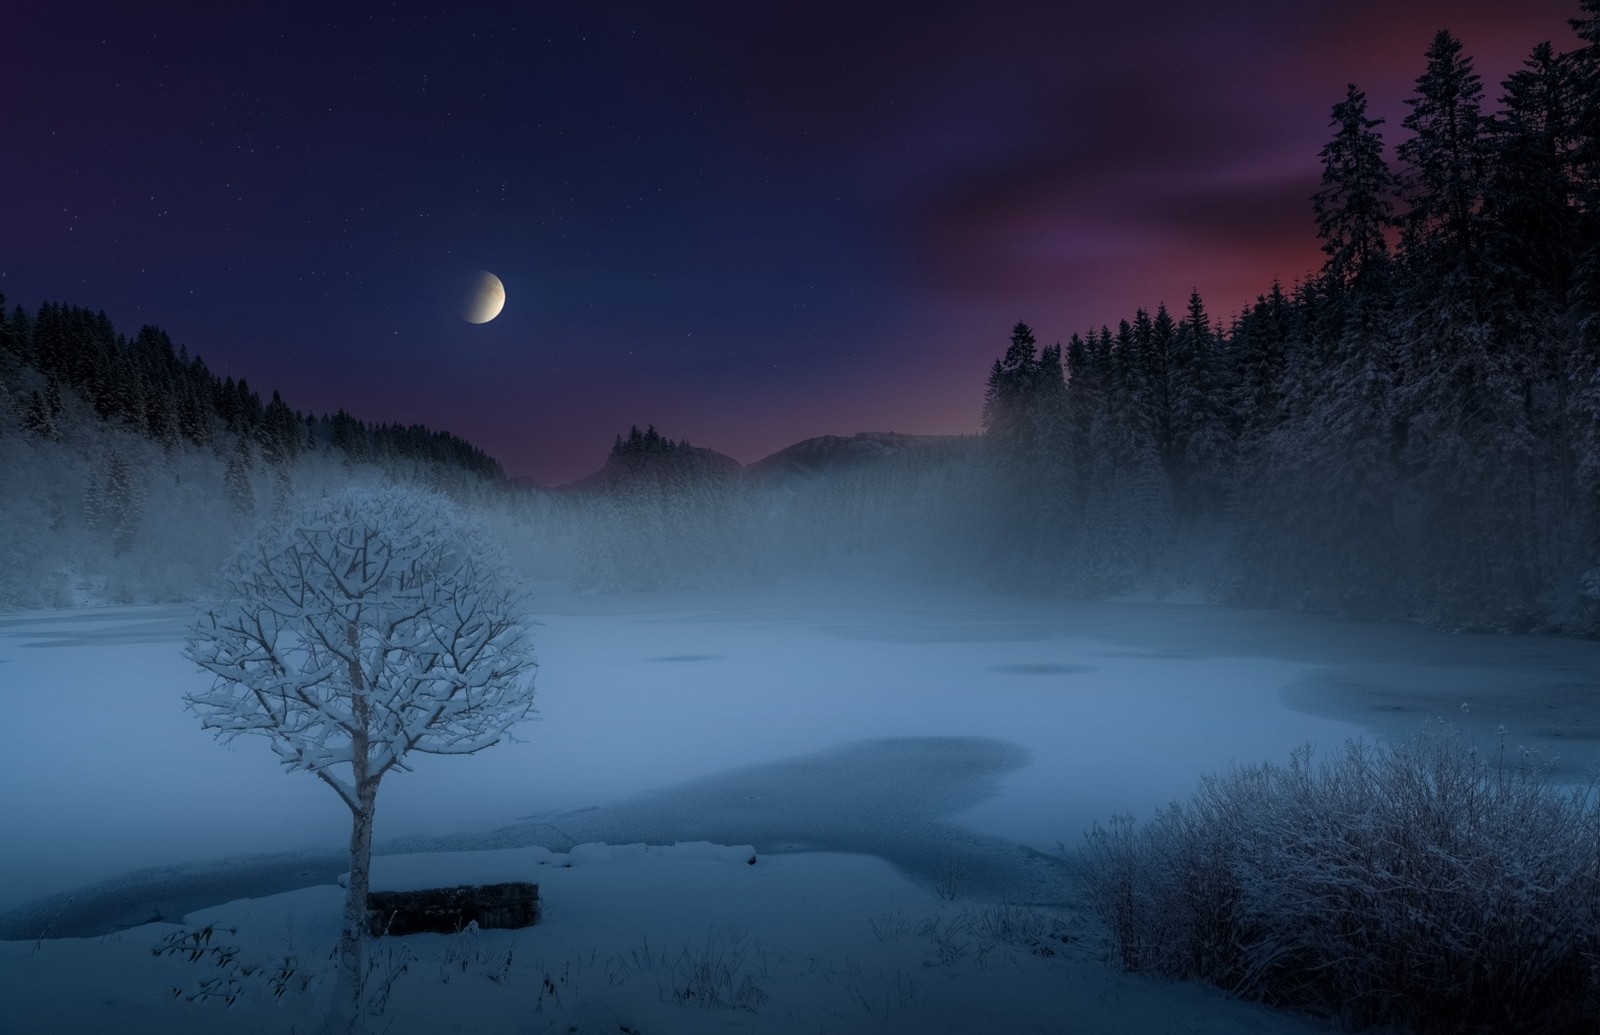 General 1600x1035 nature landscape mist lake snow forest Moon shrubs trees frost hills Norway moonlight starry night winter